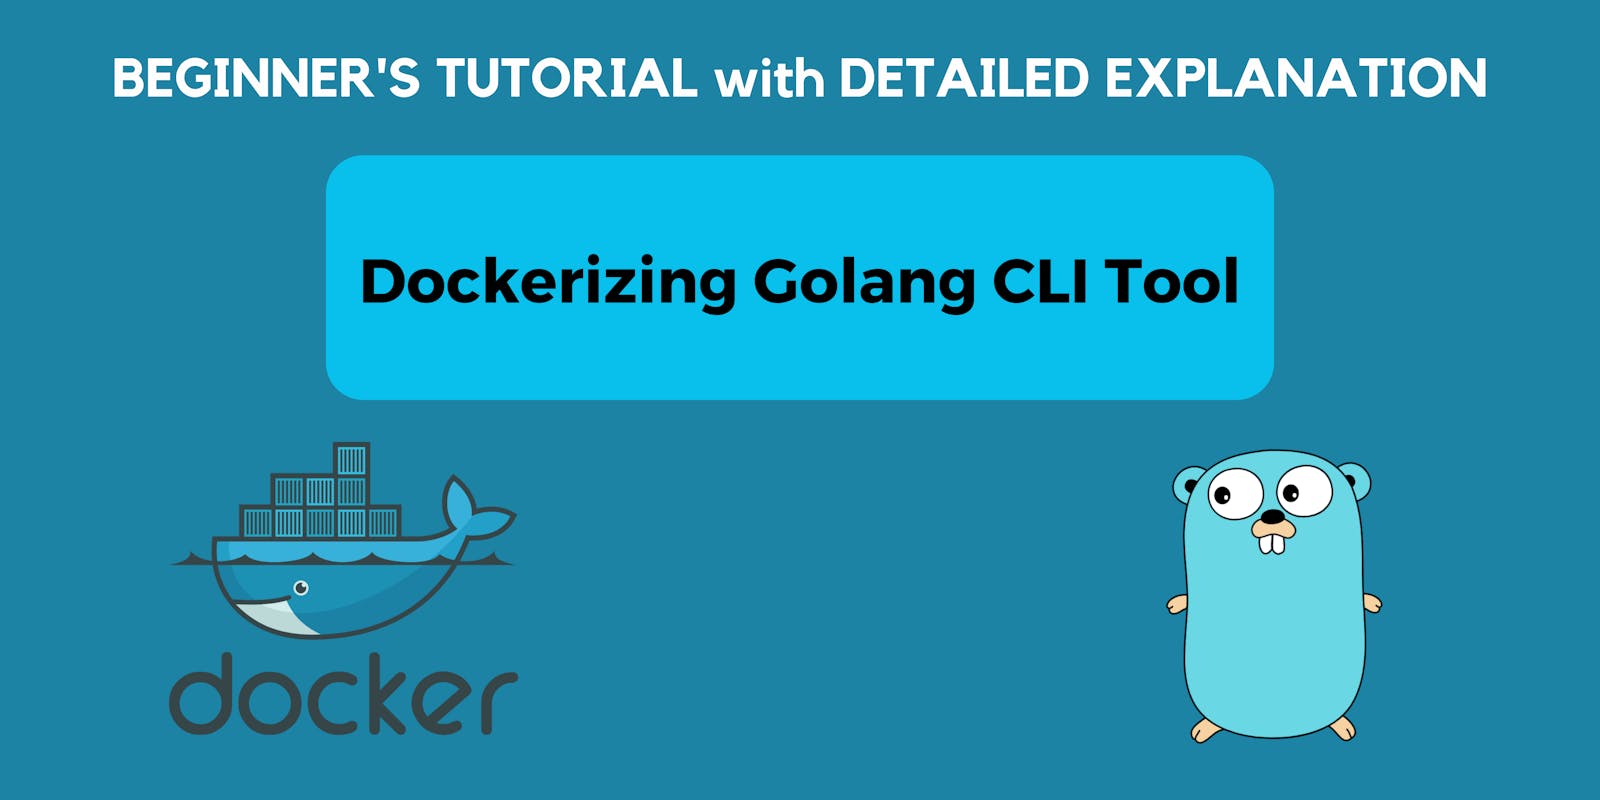 Dockerizing Golang CLI Tool - A Step-by-Step Guide